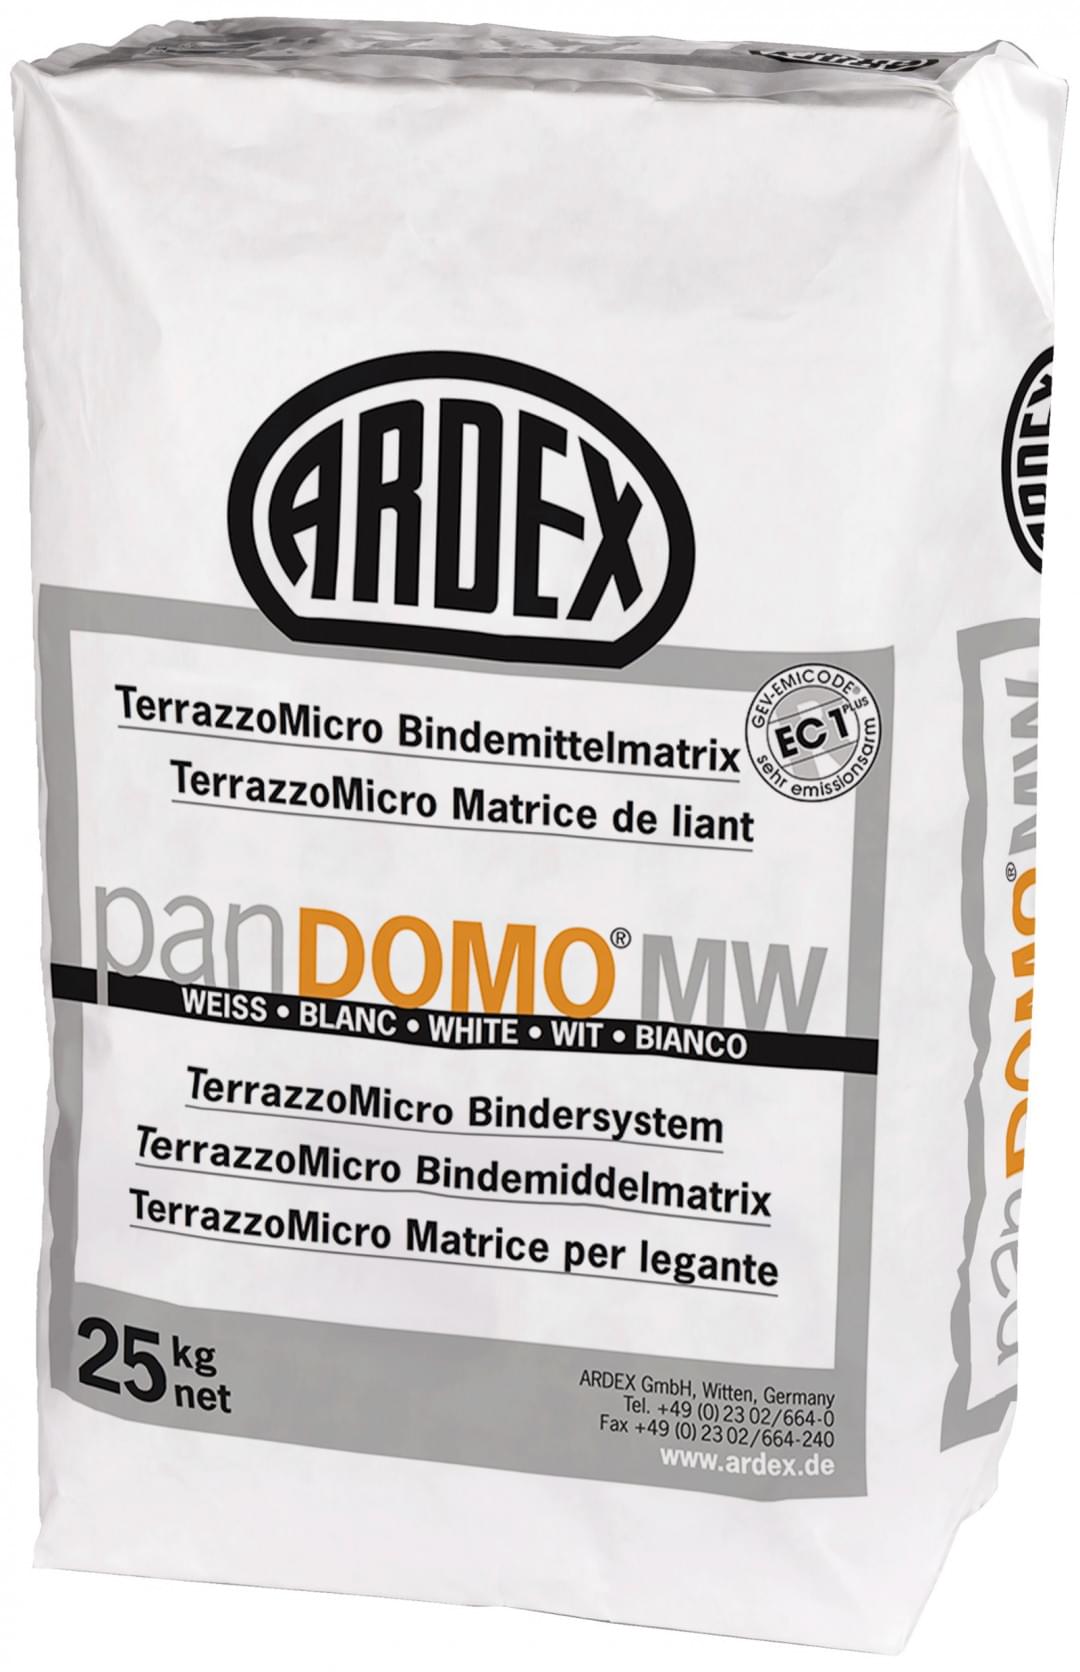 PANDOMO® MW/MB from ARDEX